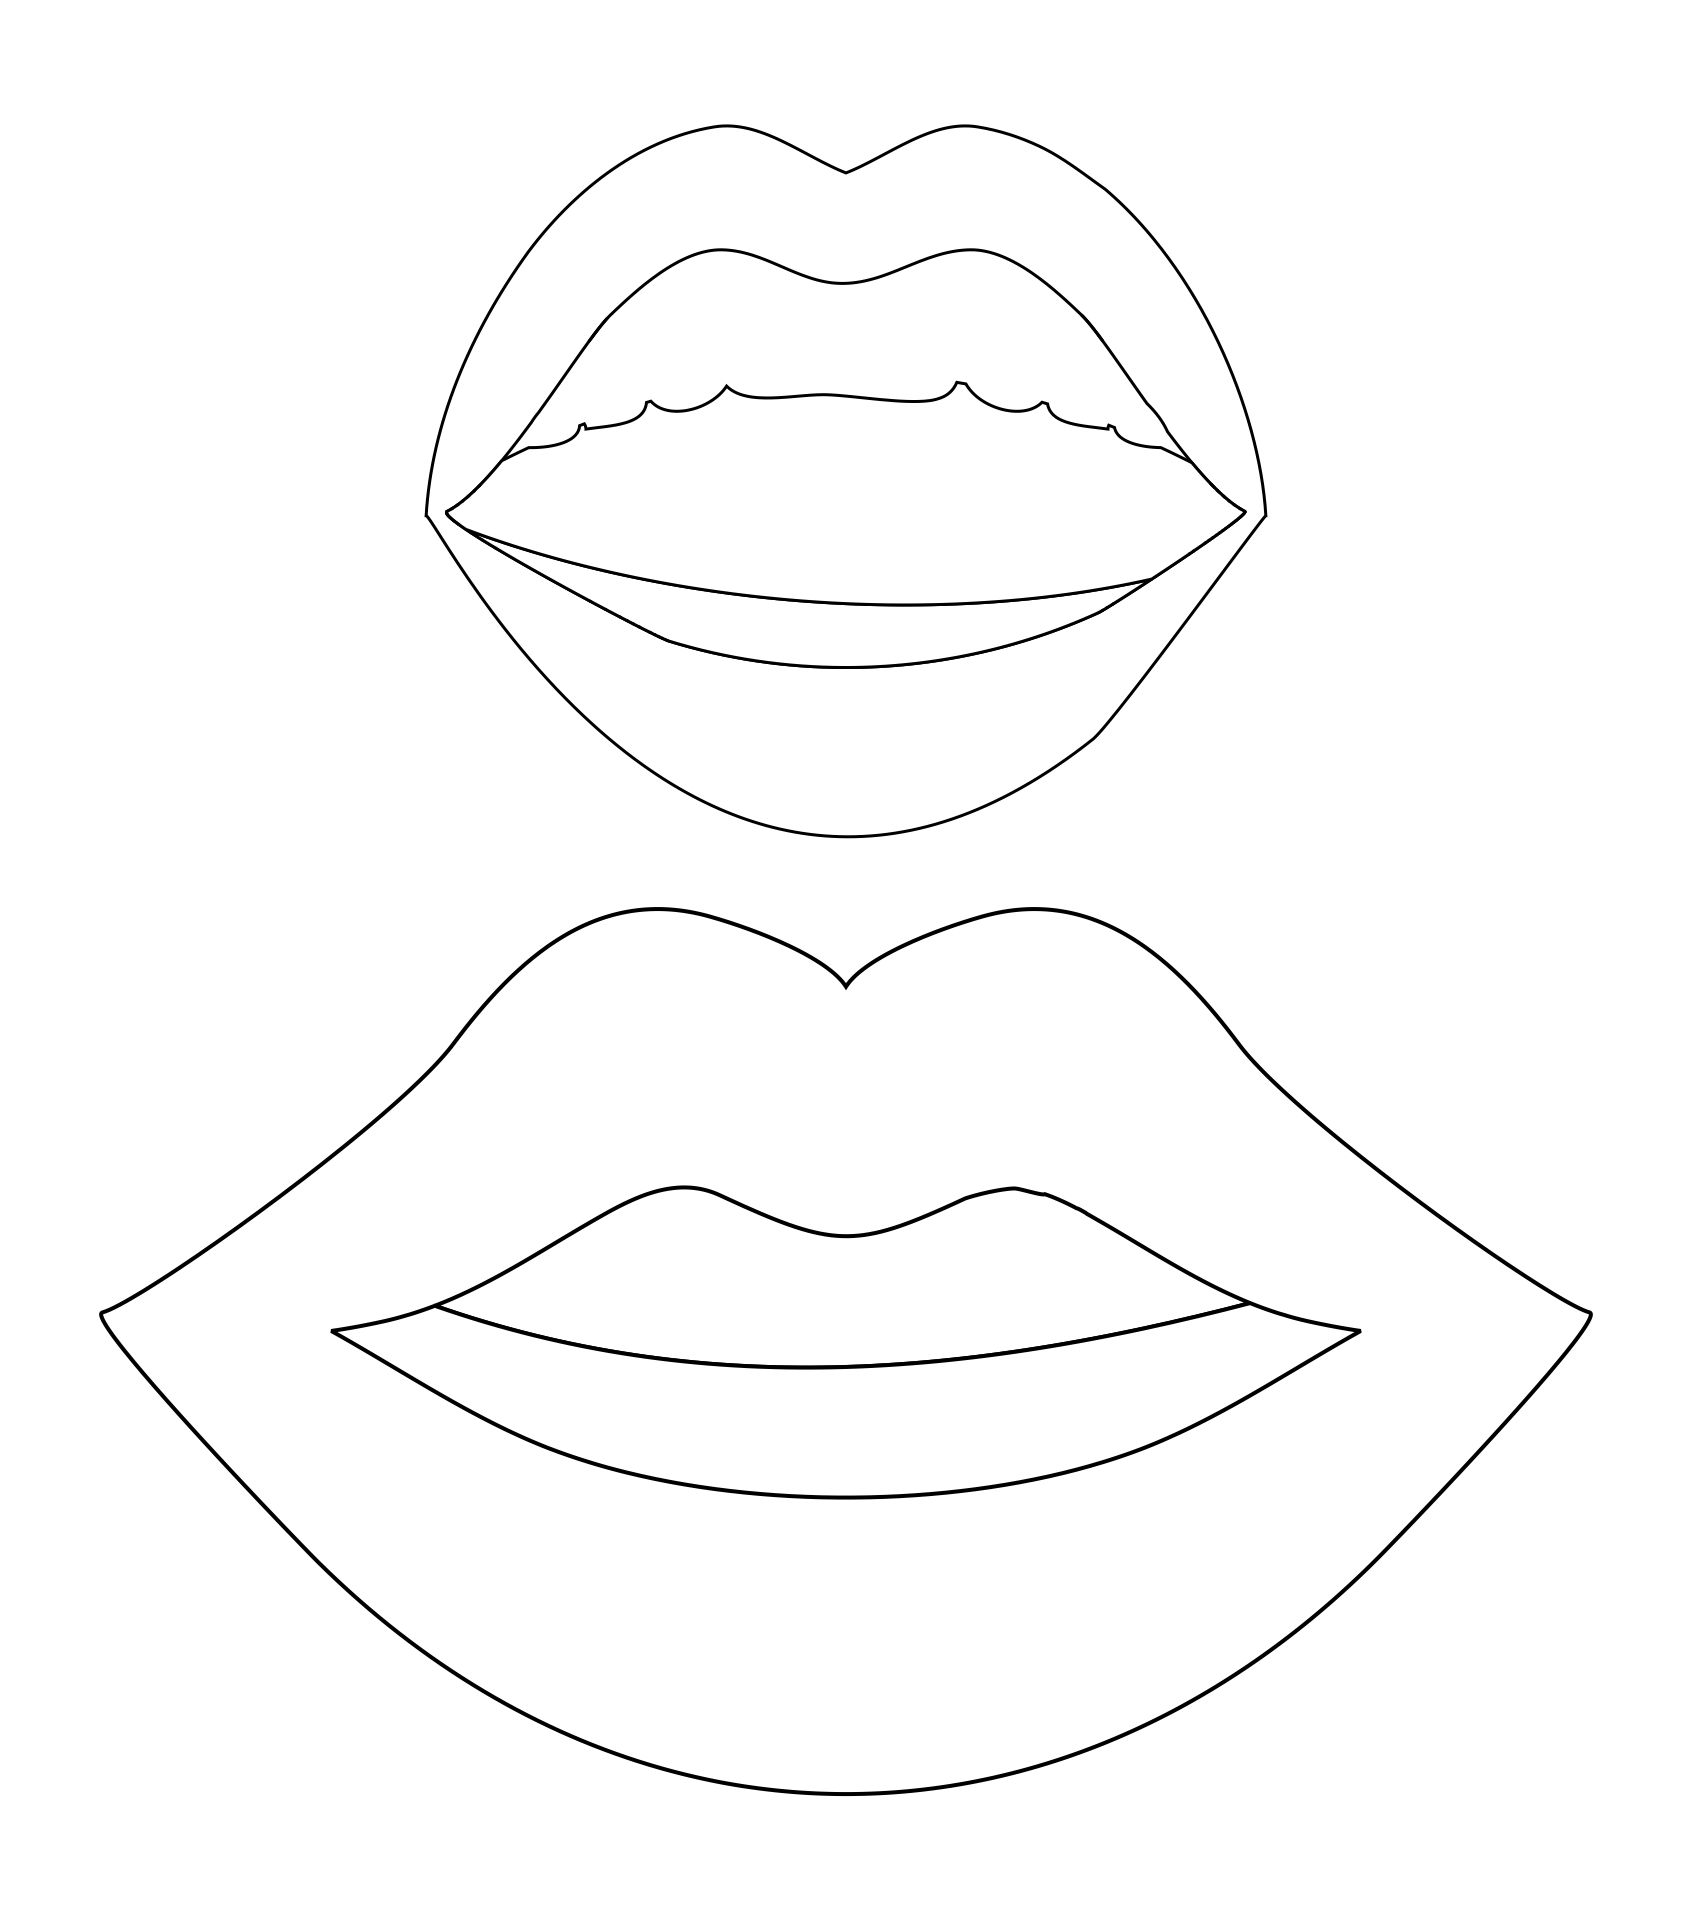 Mouth Template Printable